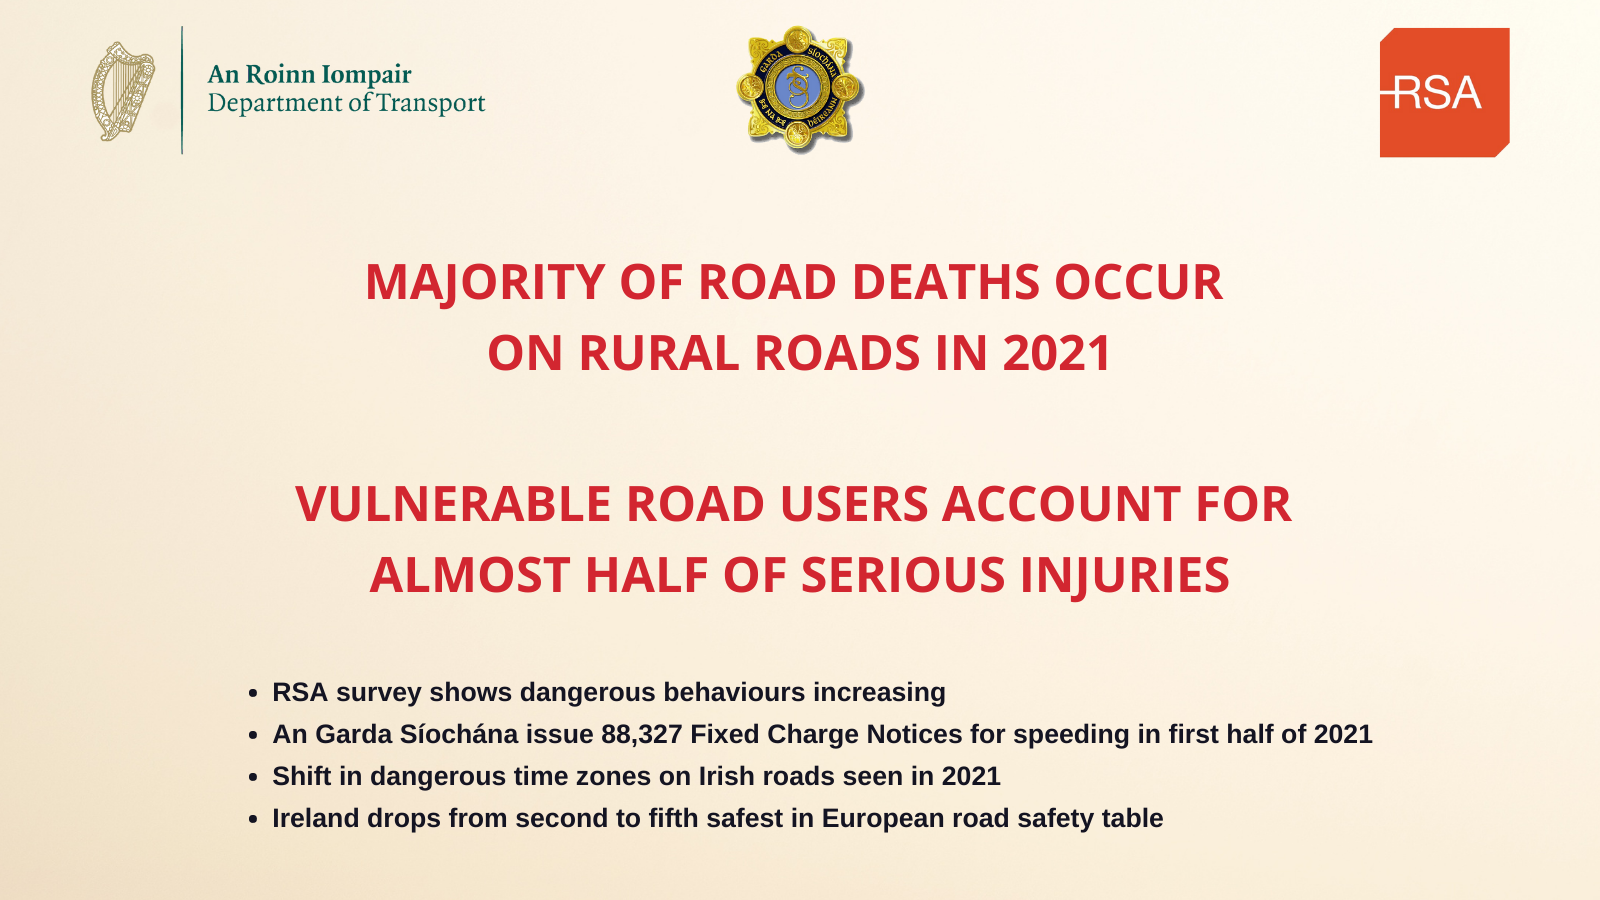 Review of Progress in Road Safety 